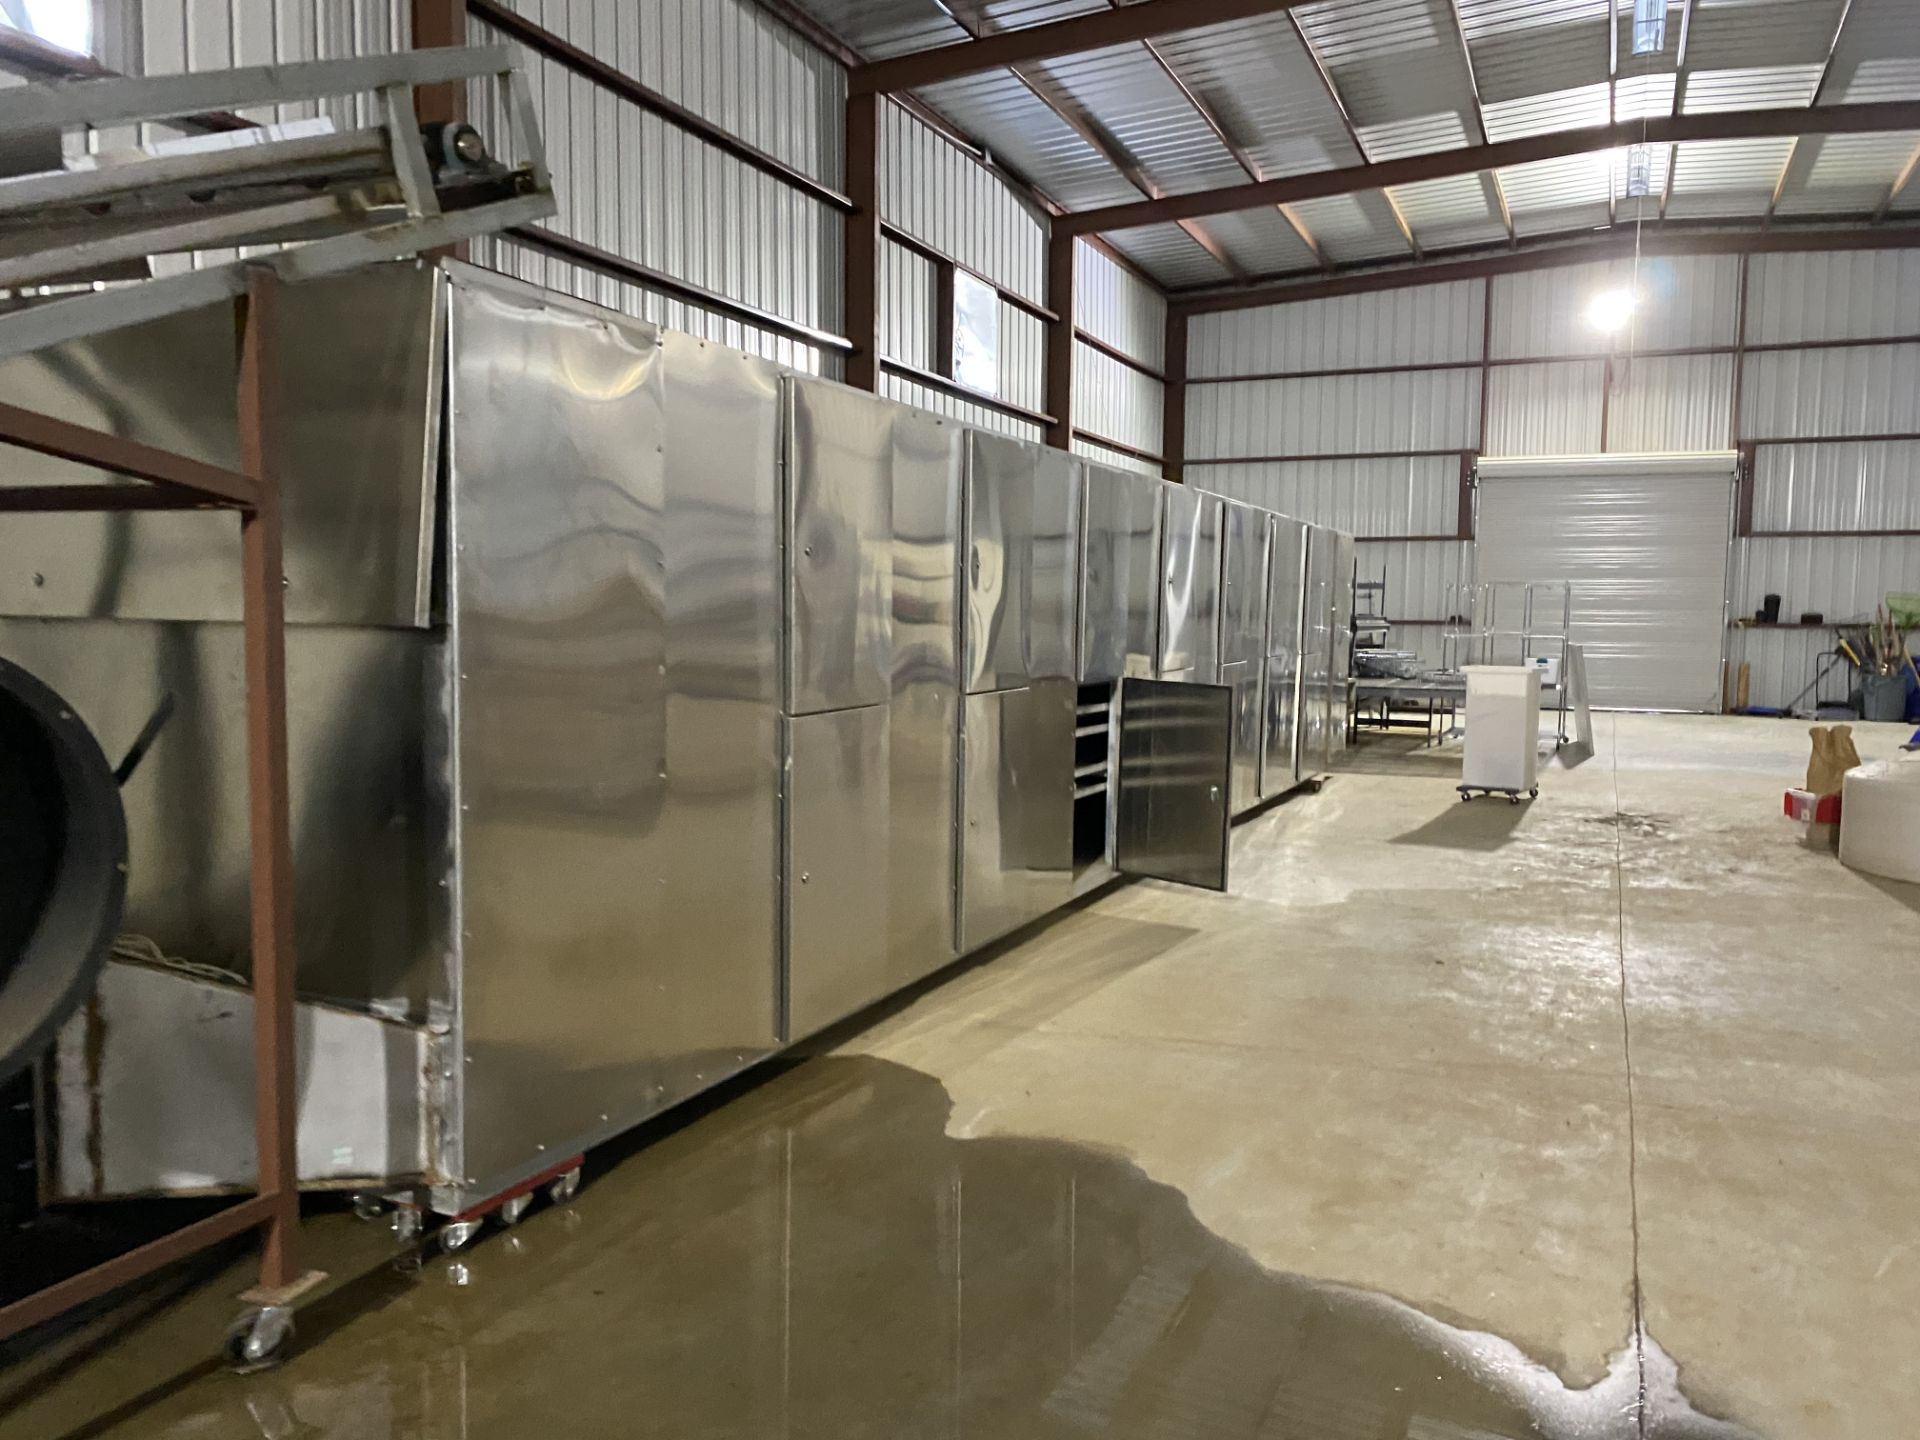 (Located in Laredo, TX) Agro Products Large Capacity Hemp Dryer, Model# 12M-5L, SS Drying Chamber w/